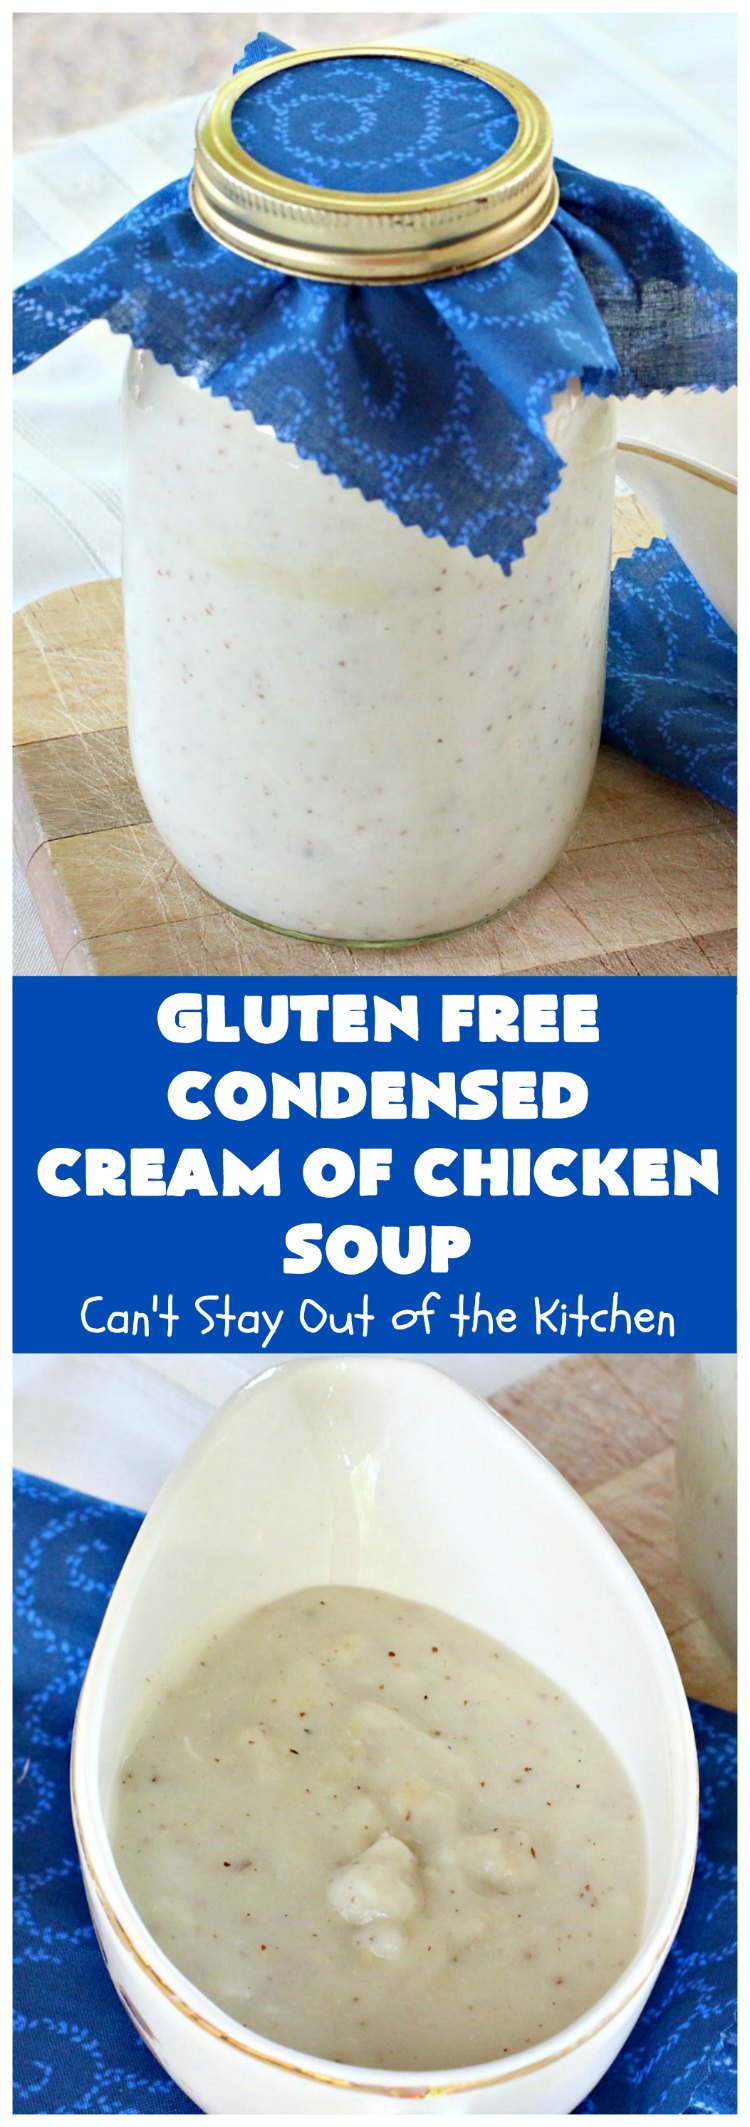 Gluten Free Condensed Cream of Chicken Soup | Can't Stay Out of the Kitchen